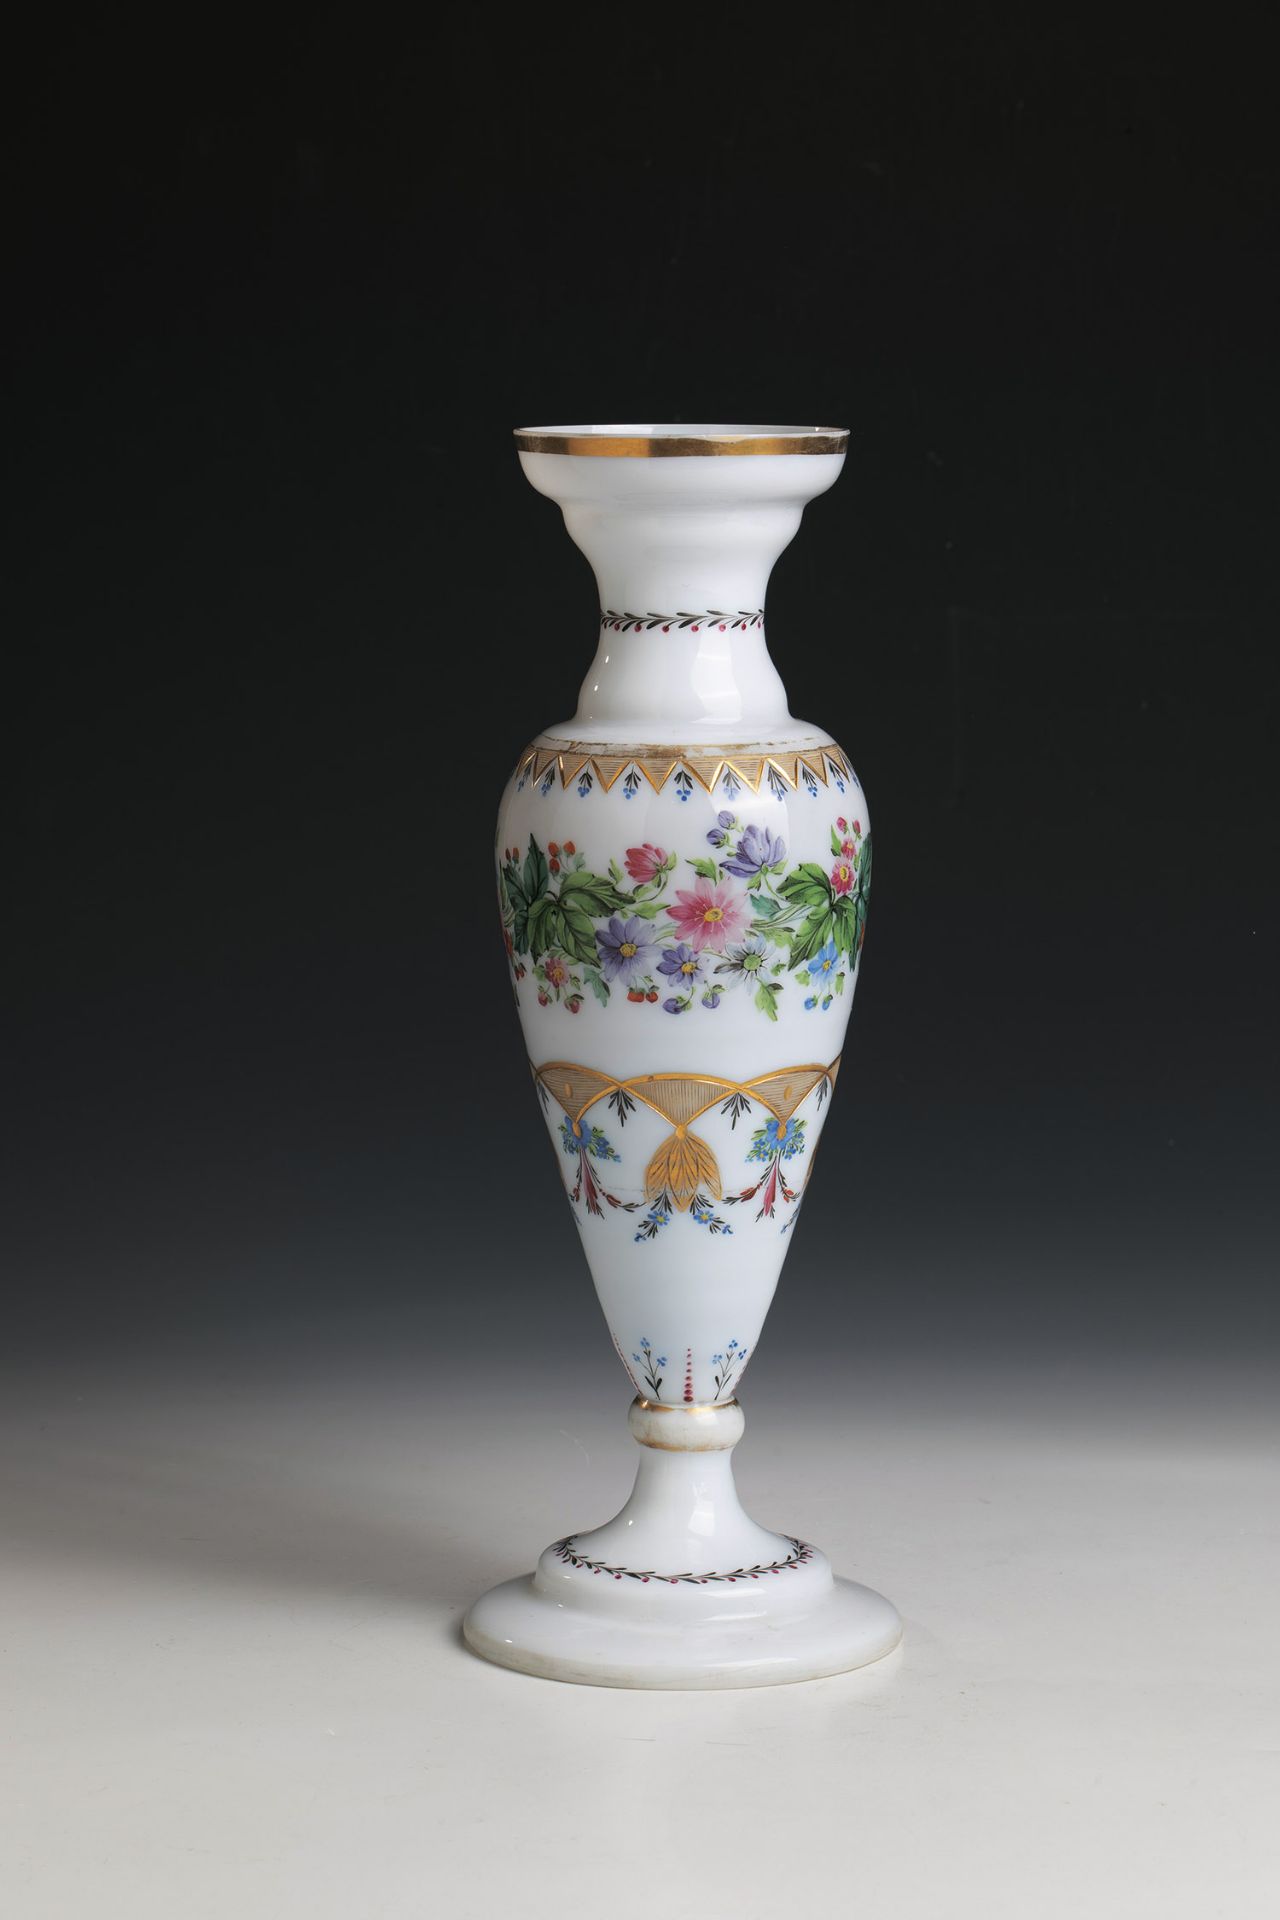 Rare vase of North Bohemia, probably Kreibitz, ca. 1825 frosted glass with colorful floral